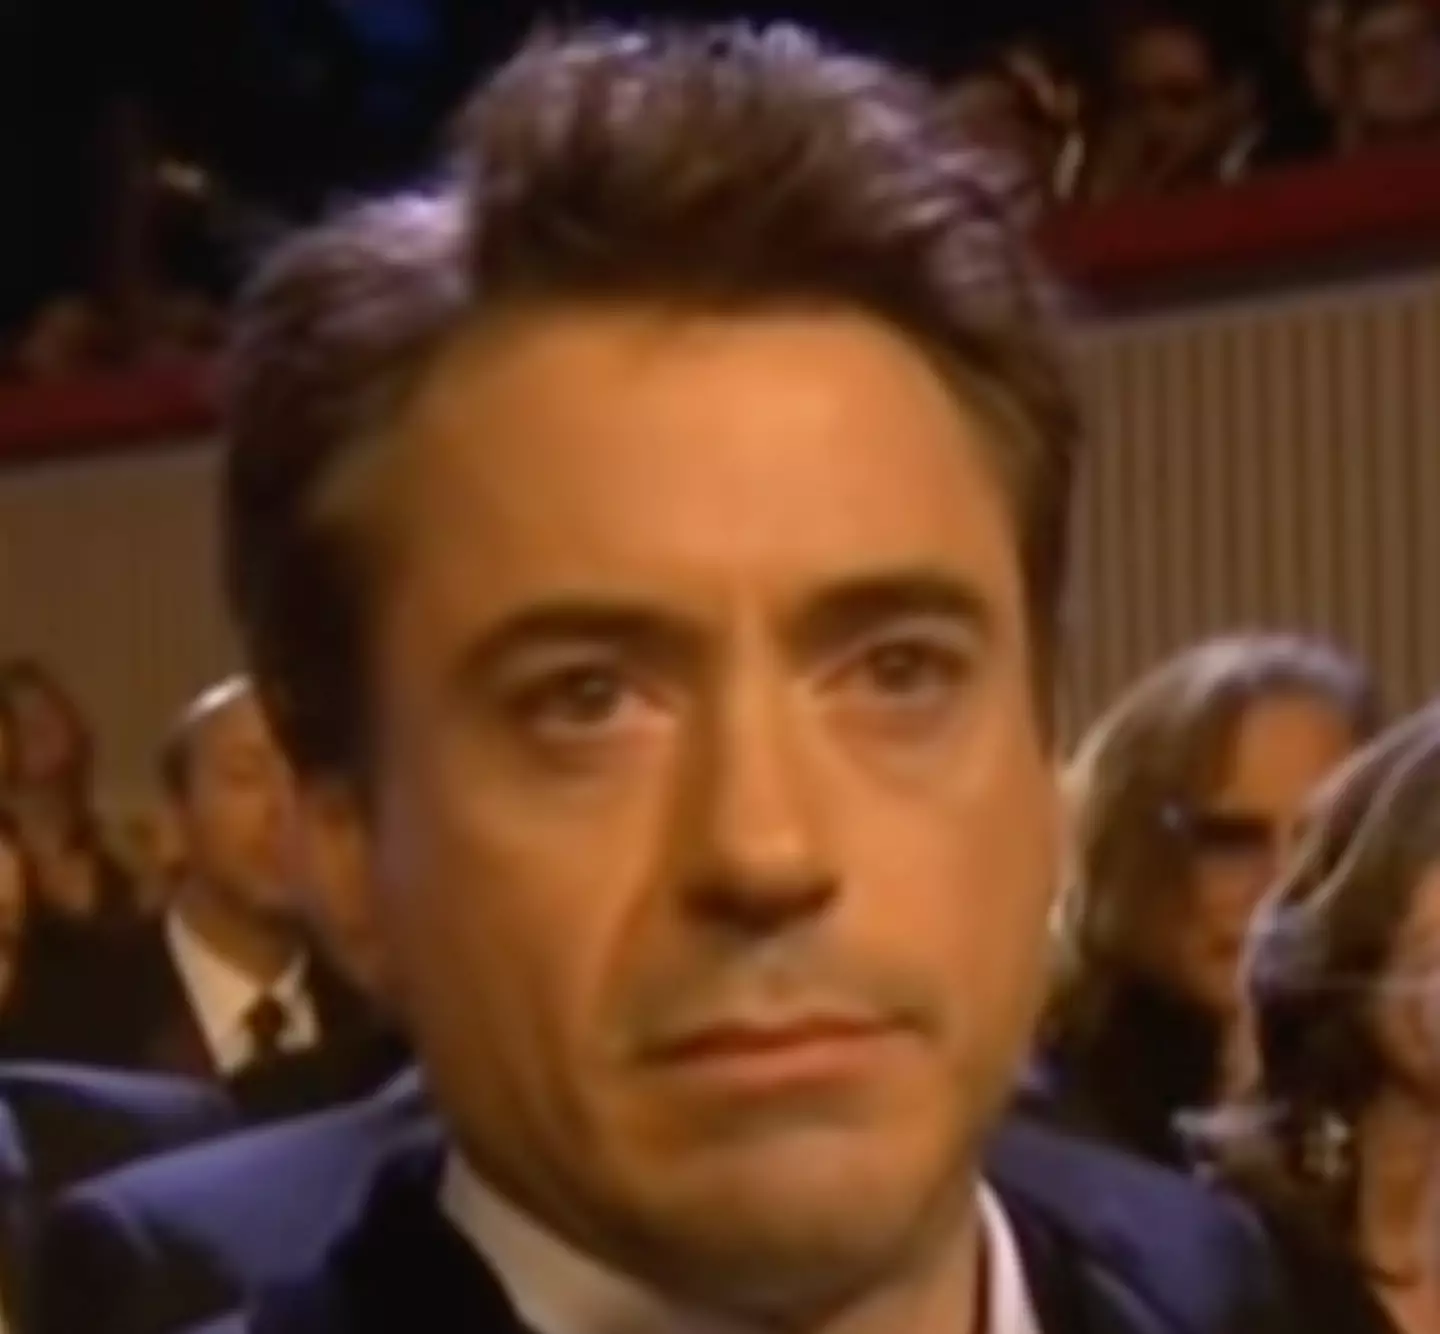 Celebrities like Robert Downey Jr. were left emotional at the Australian actor posthumously winning the award.